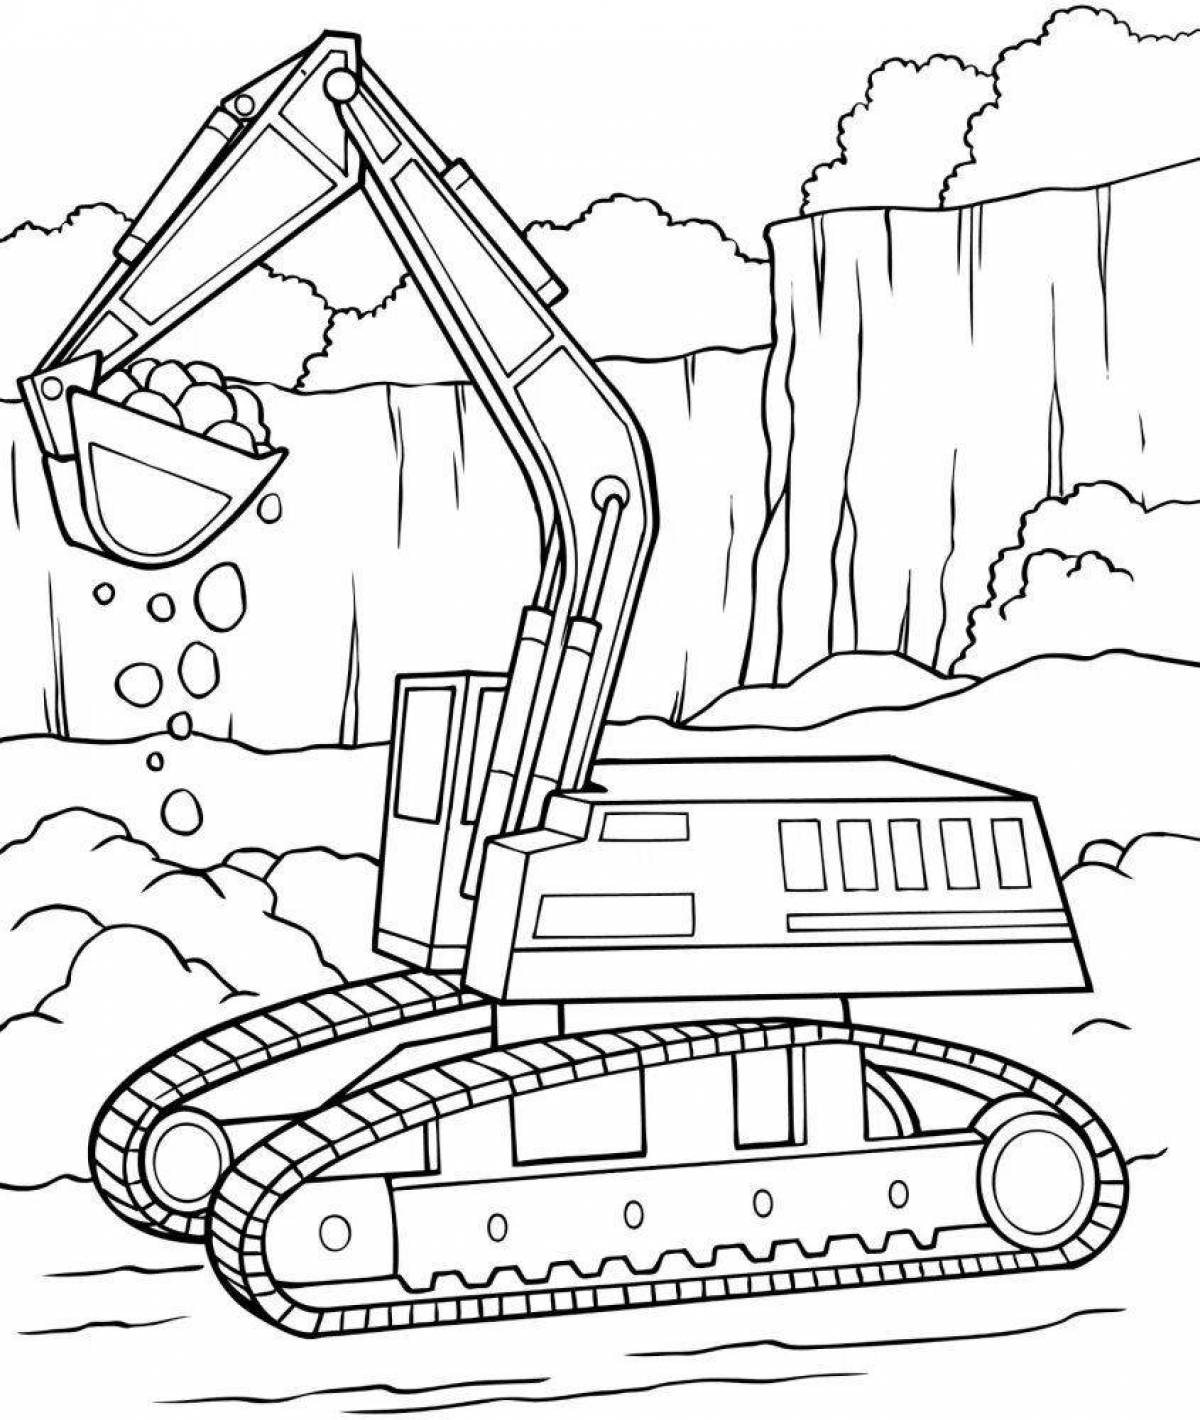 Colorful technology coloring page for kids